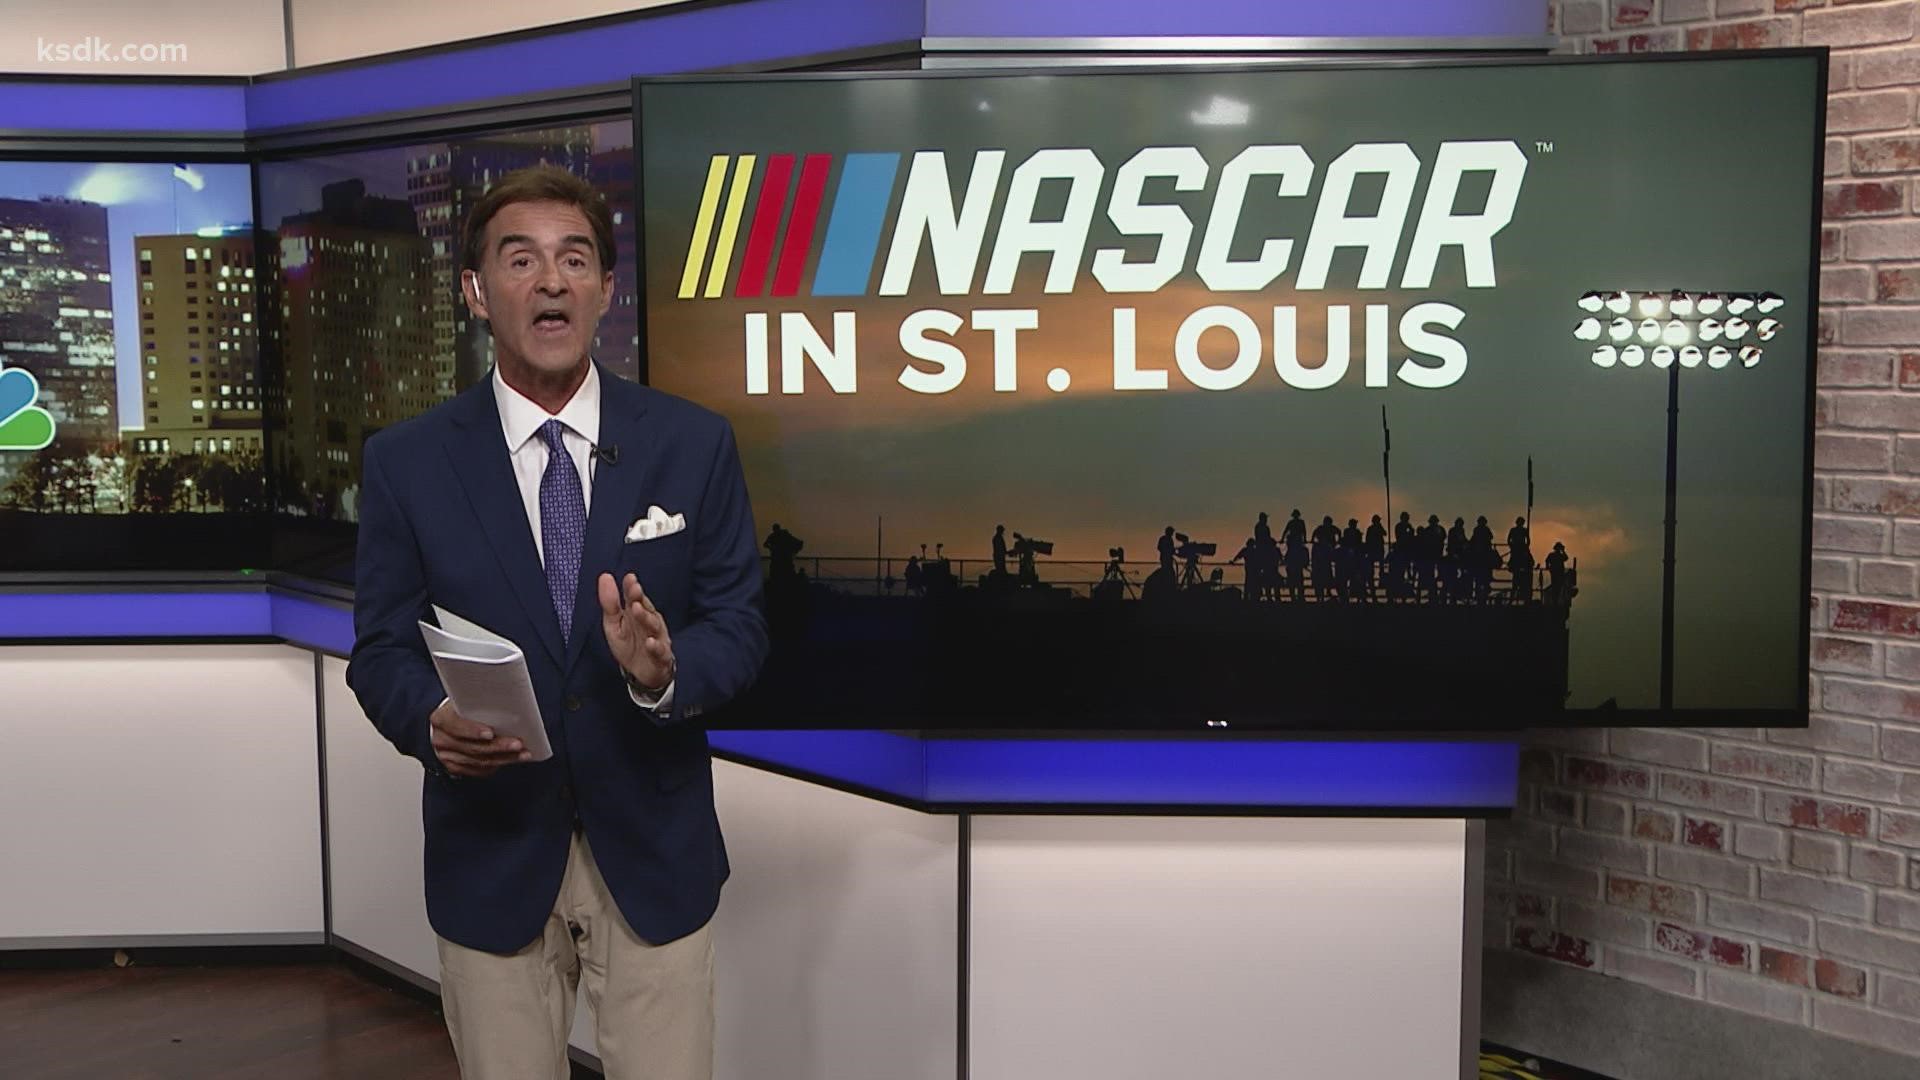 5 On Your Side's Frank Cusumano reports St. Louis could be on the schedule for the NASCAR Cup Series in 2022.